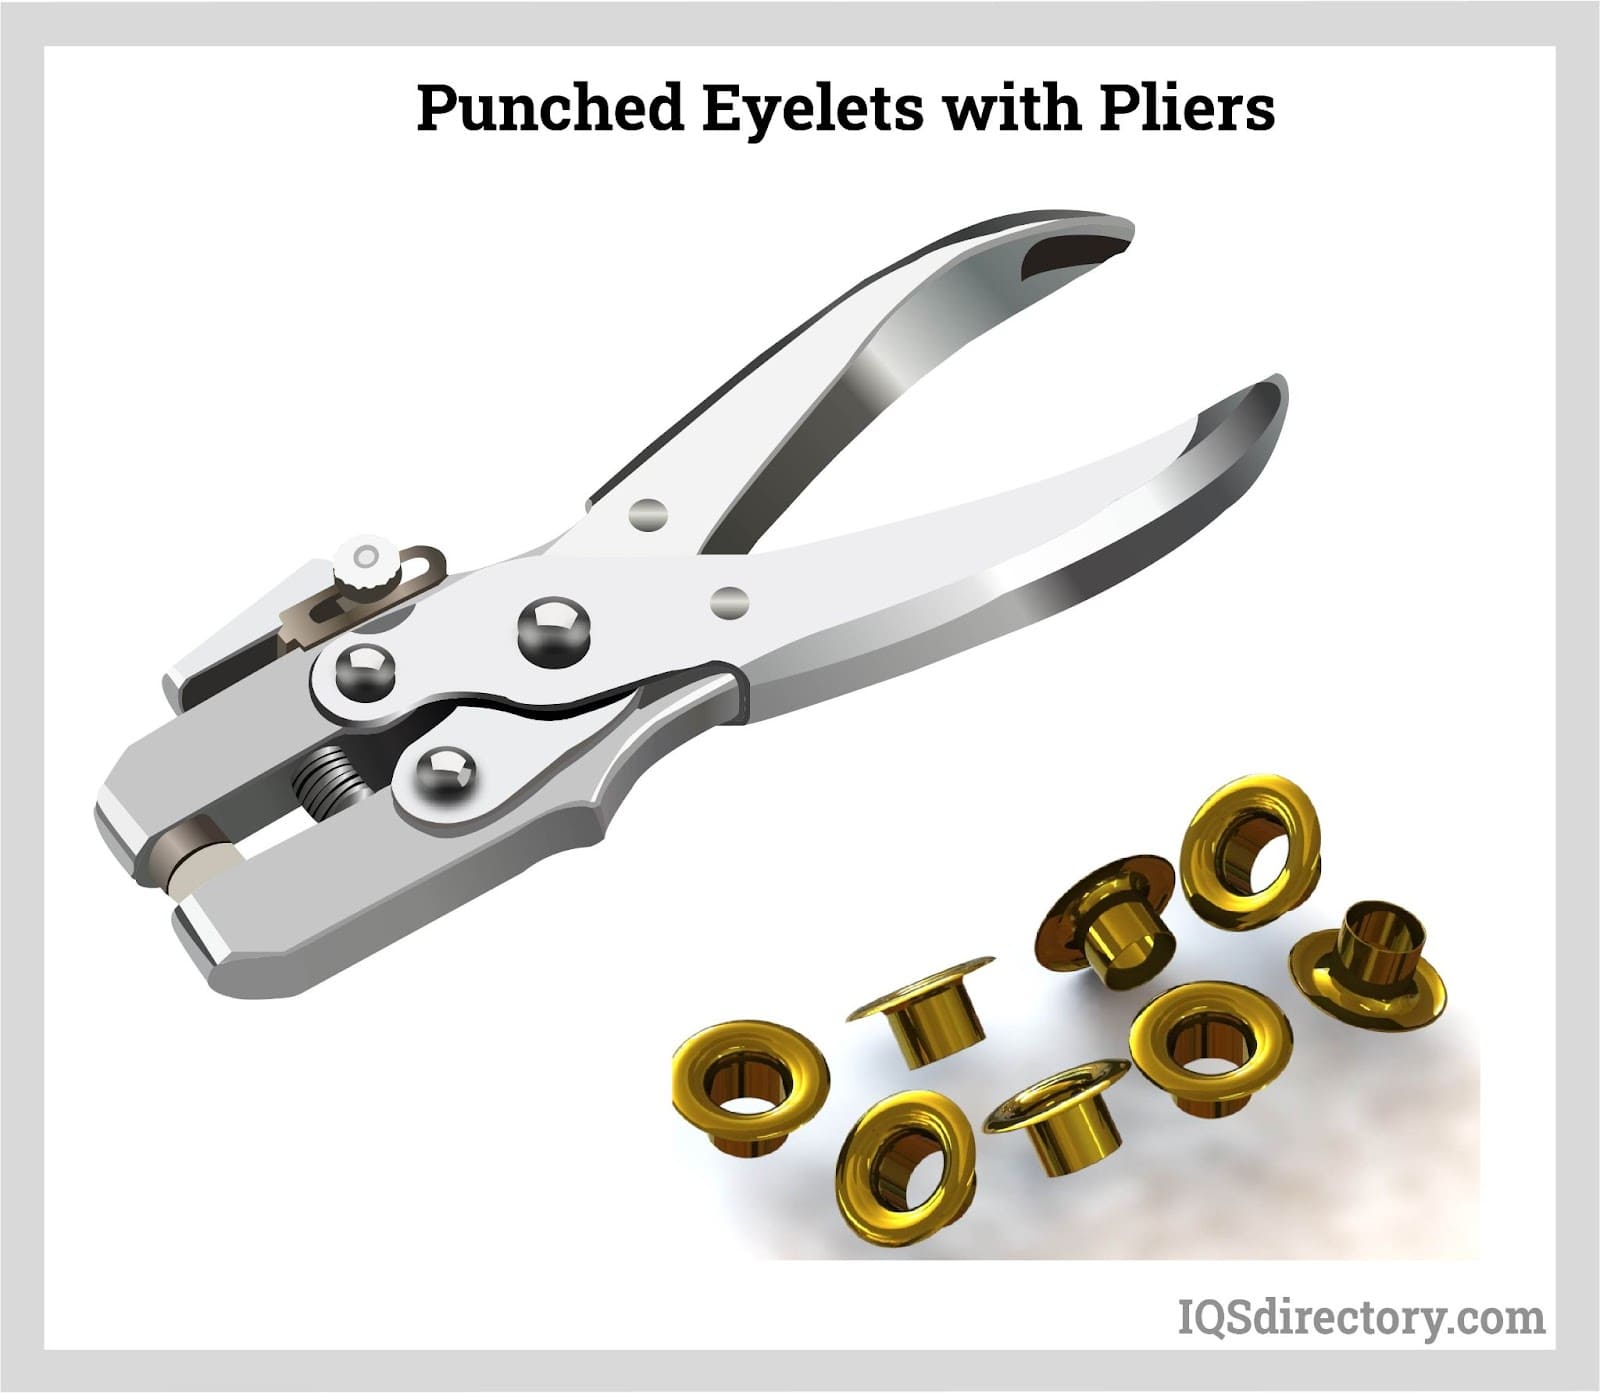 Punched Eyelets with Pliers